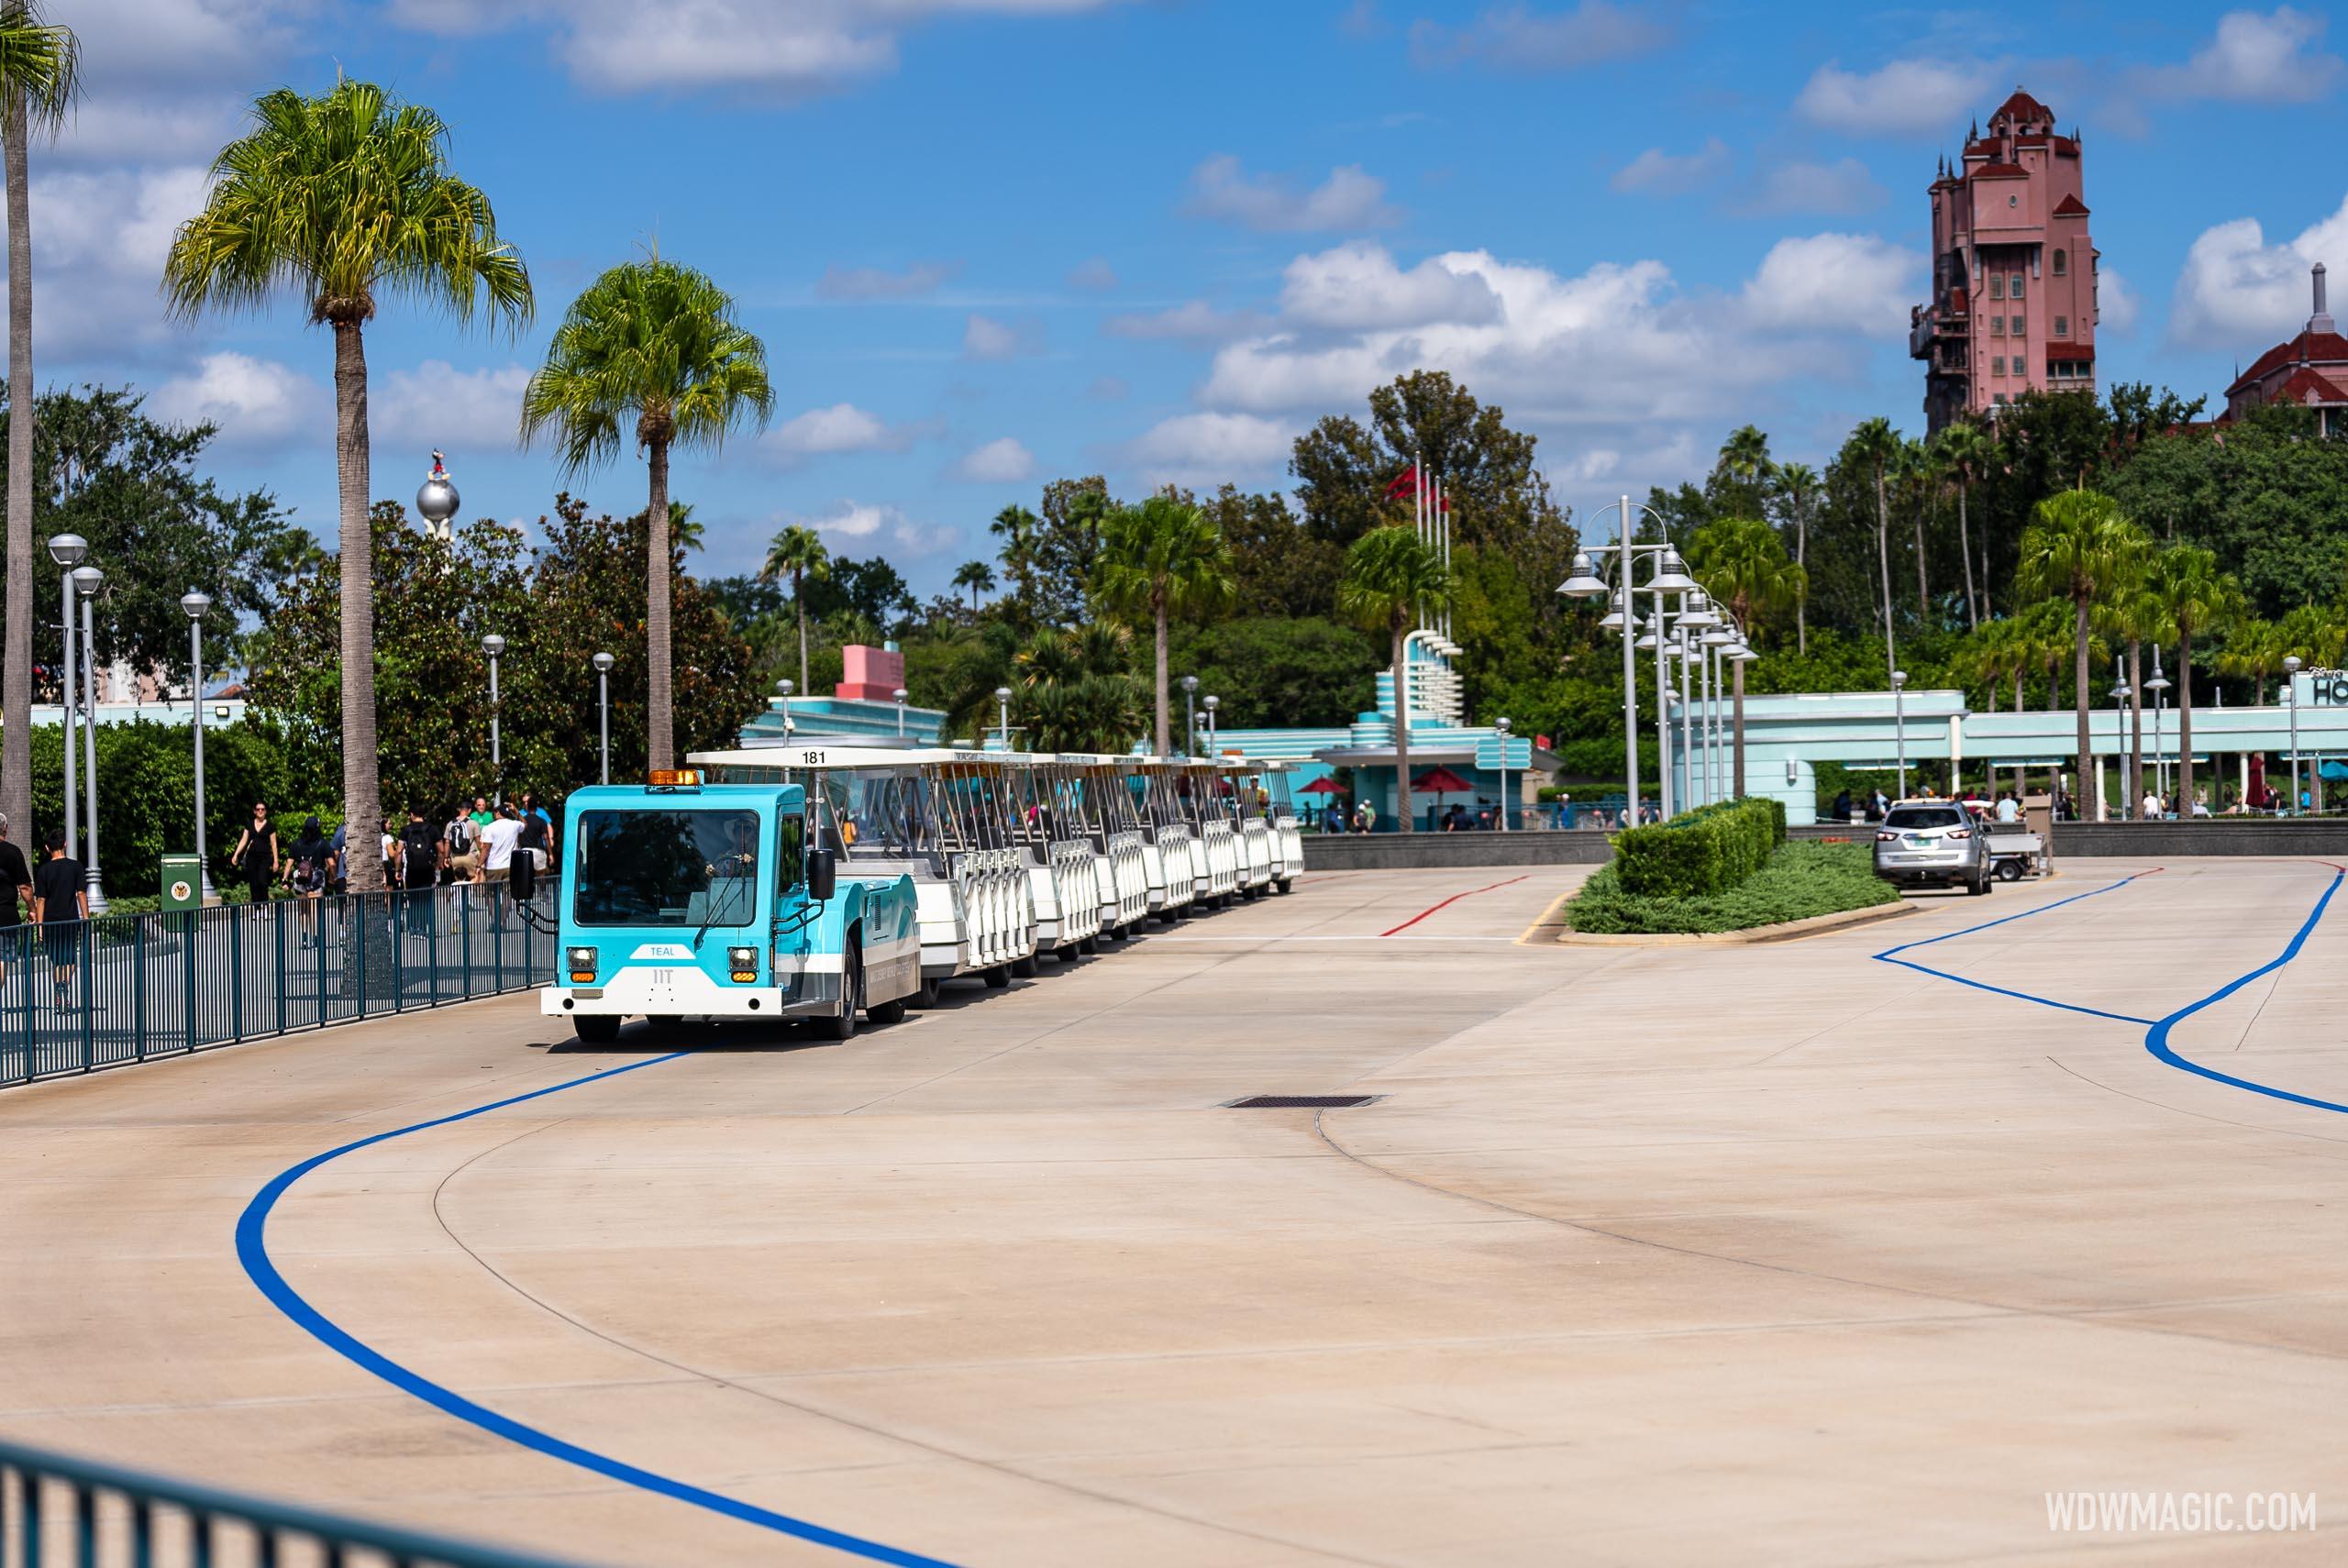 Parking lot tram service makes a long-awaited return to Disney's Hollywood Studios and EPCOT